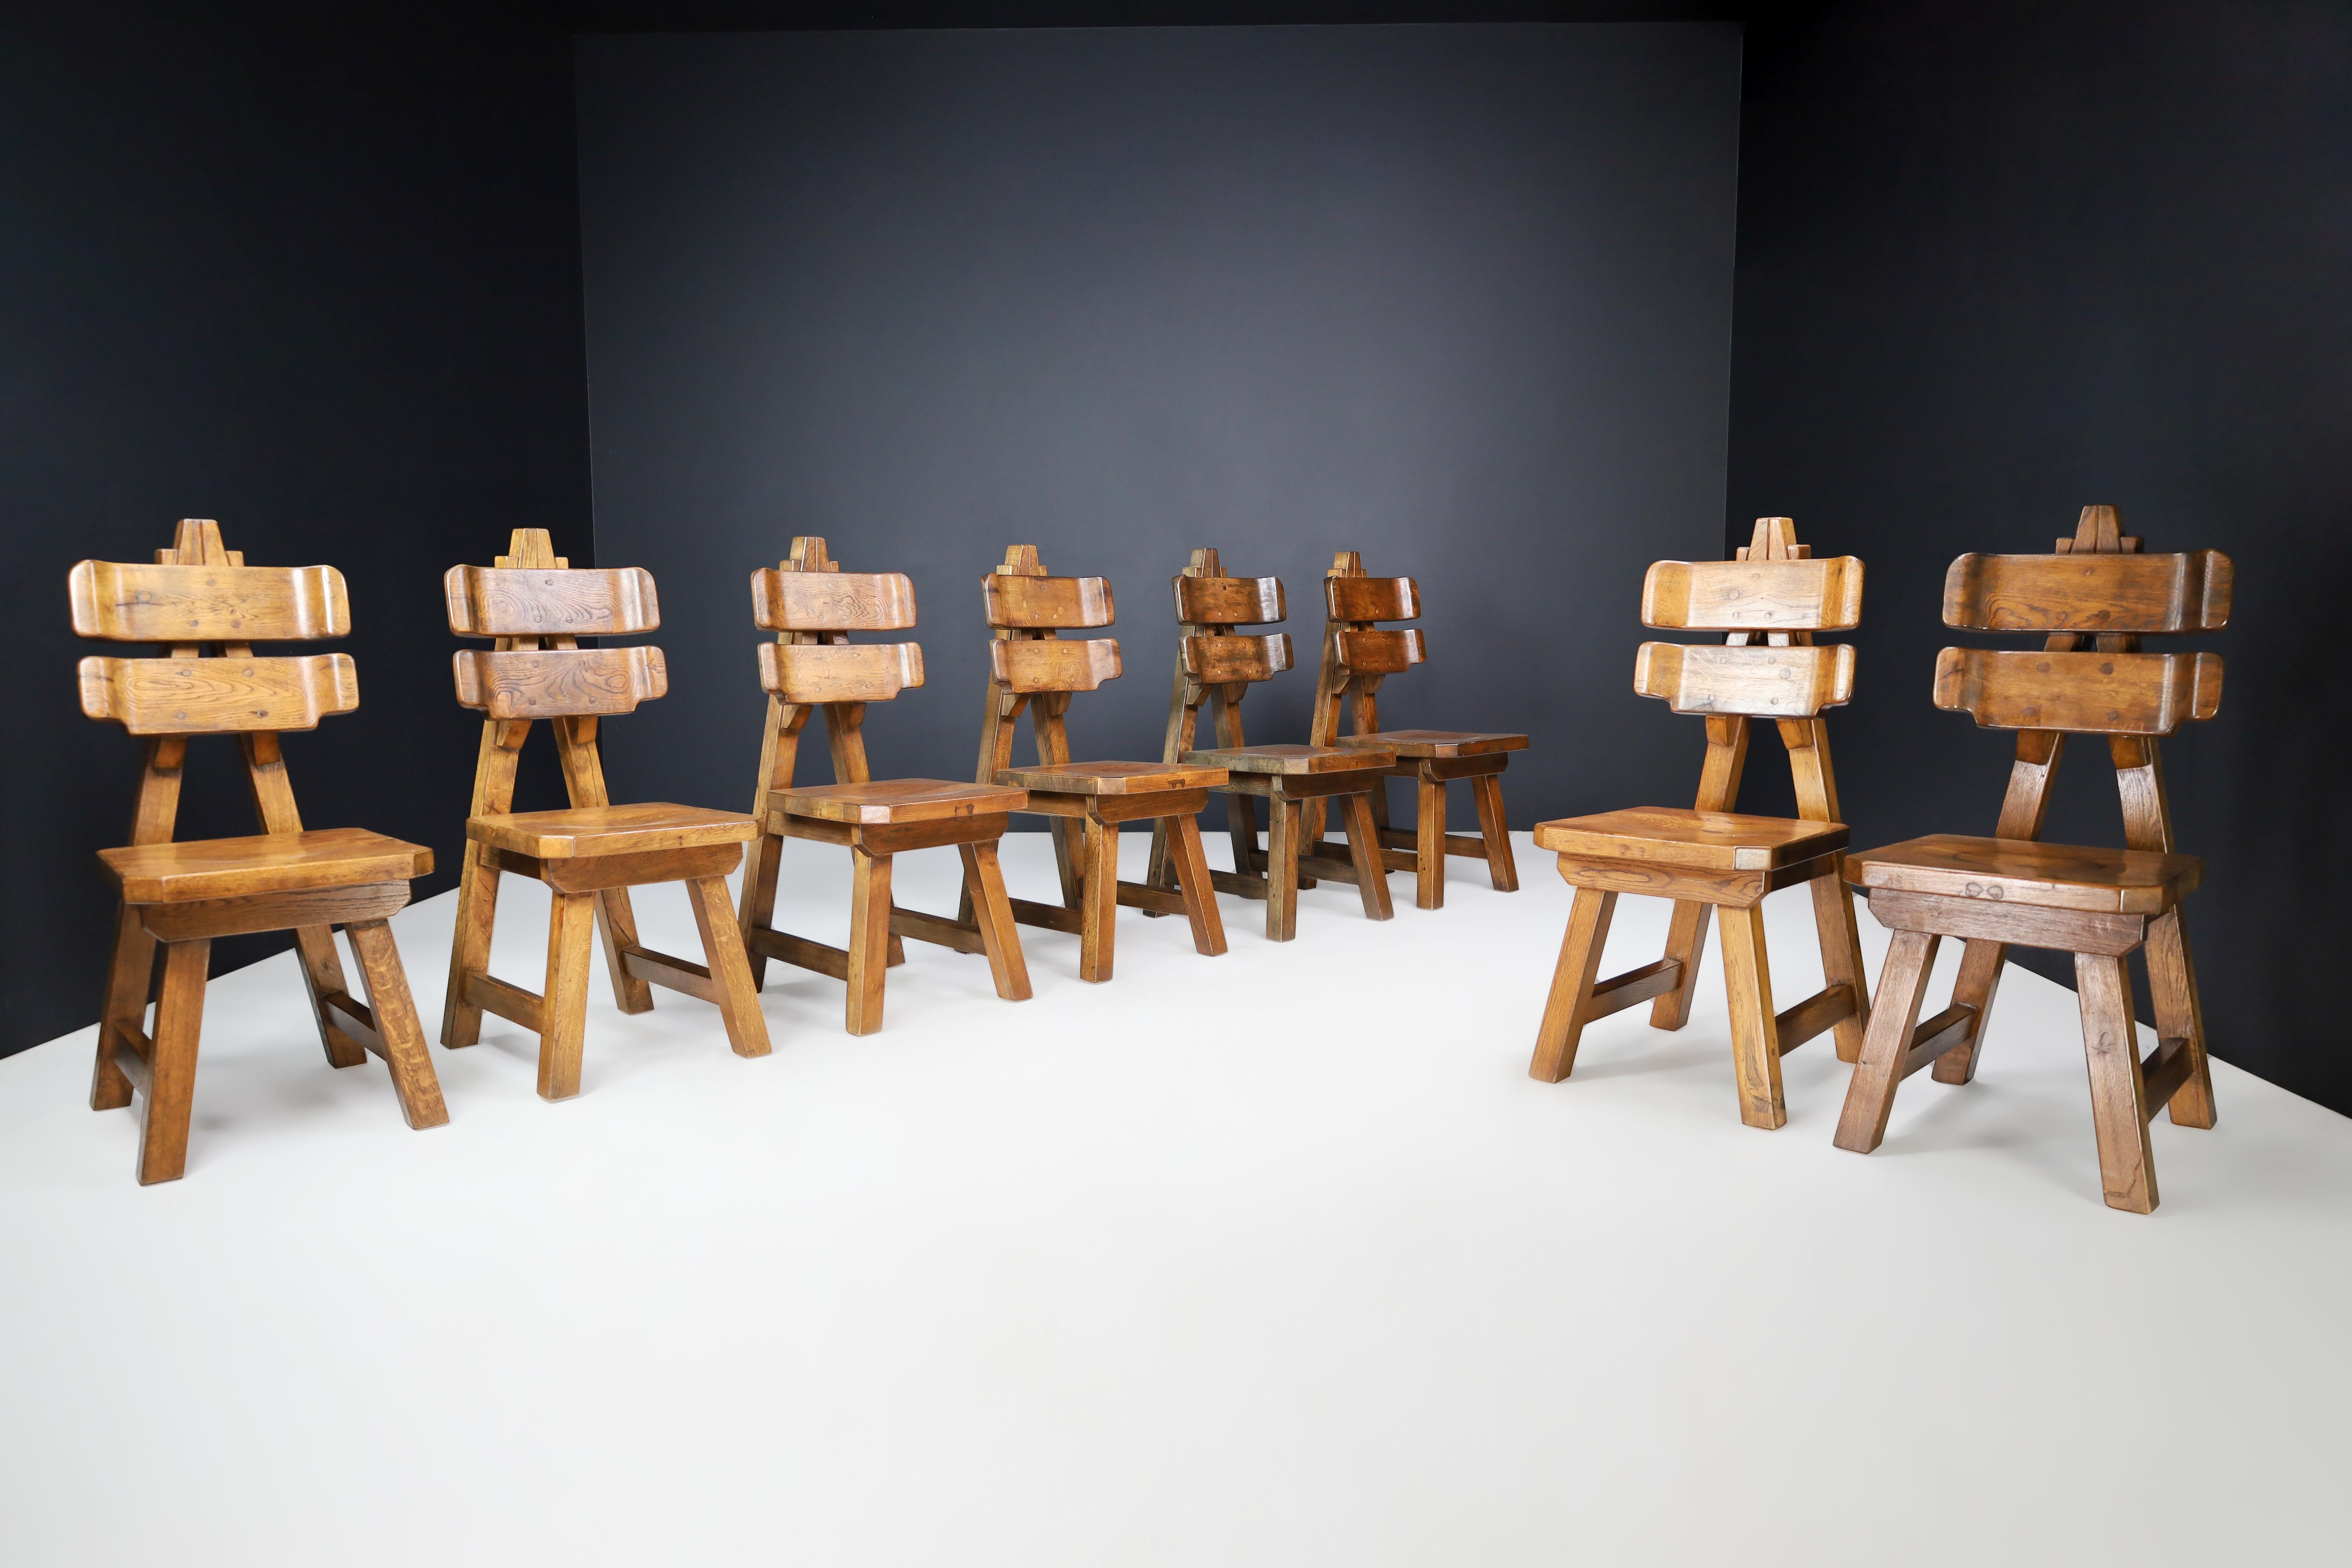 Sculptural Set of Eight Brutalist Dining Chairs in Solid Oak, France, 1960s

These eight dining chairs are a rare find from France, made in the late 1960s. The design is notable for its curved backrest and rounded, carved seat. The triangular back